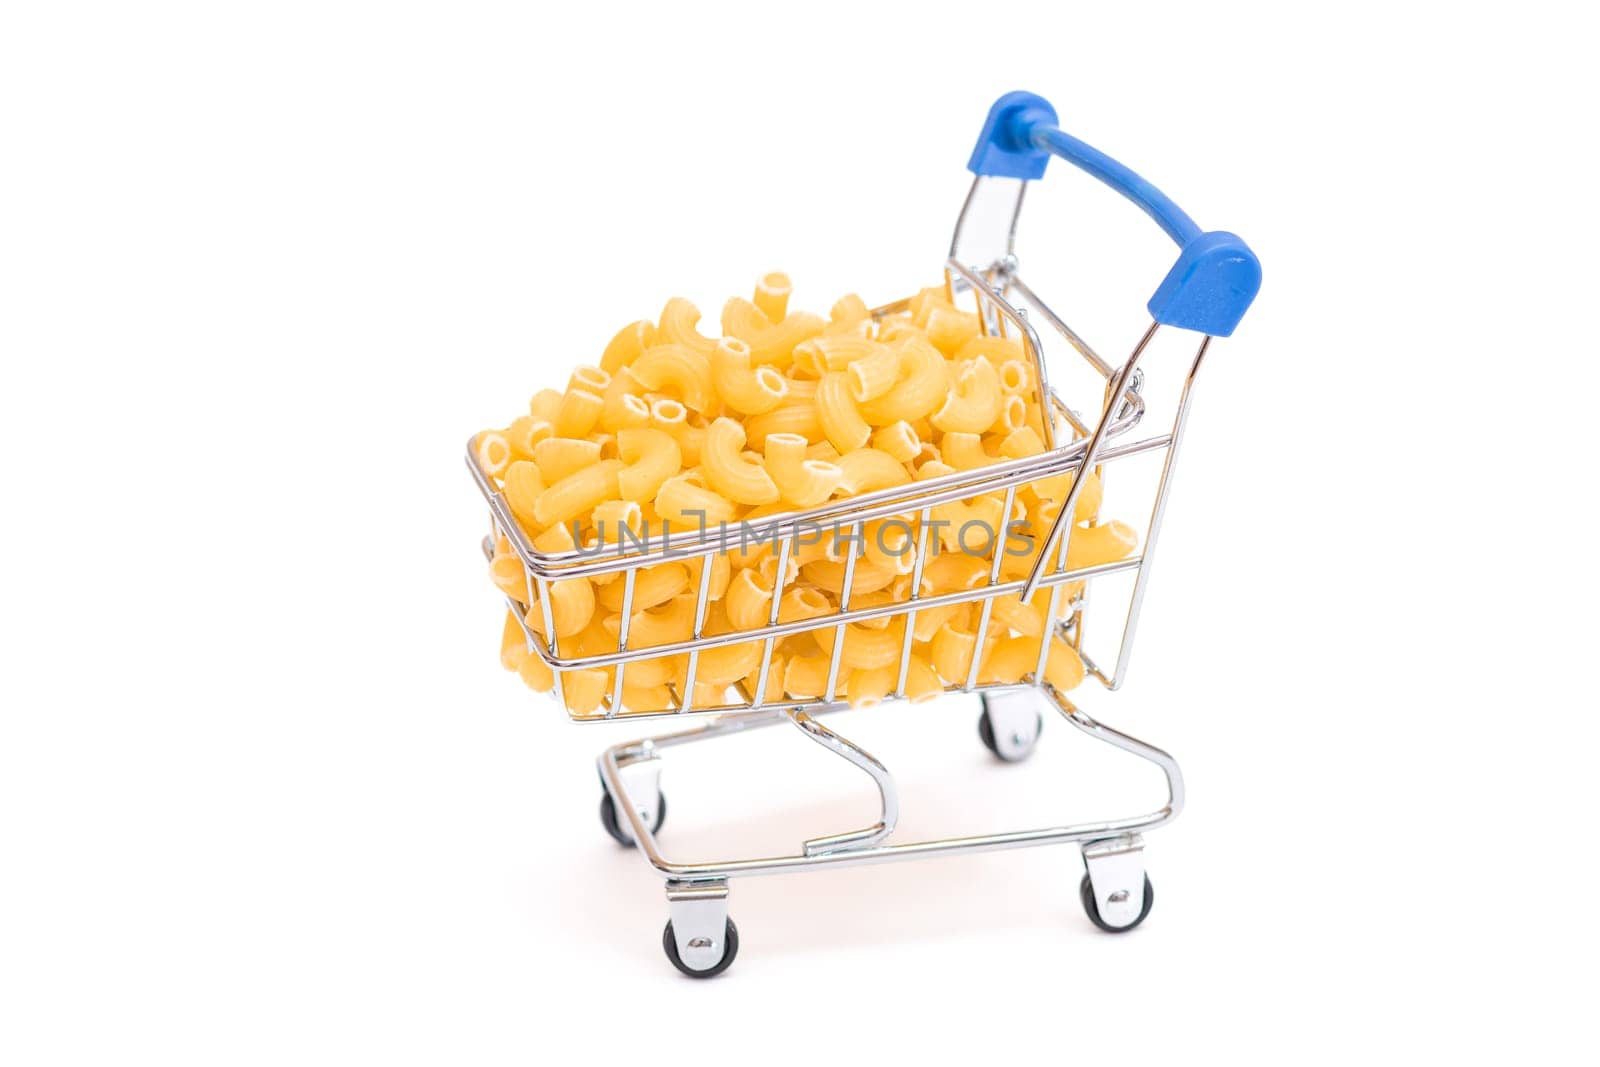 Uncooked Chifferi Rigati Pasta in Small Shopping Cart Isolated on White Background. A Crisis: Buying Cheap Food. Classic Dry Macaroni. Italian Culture and Cuisine. Raw Pasta - Isolation